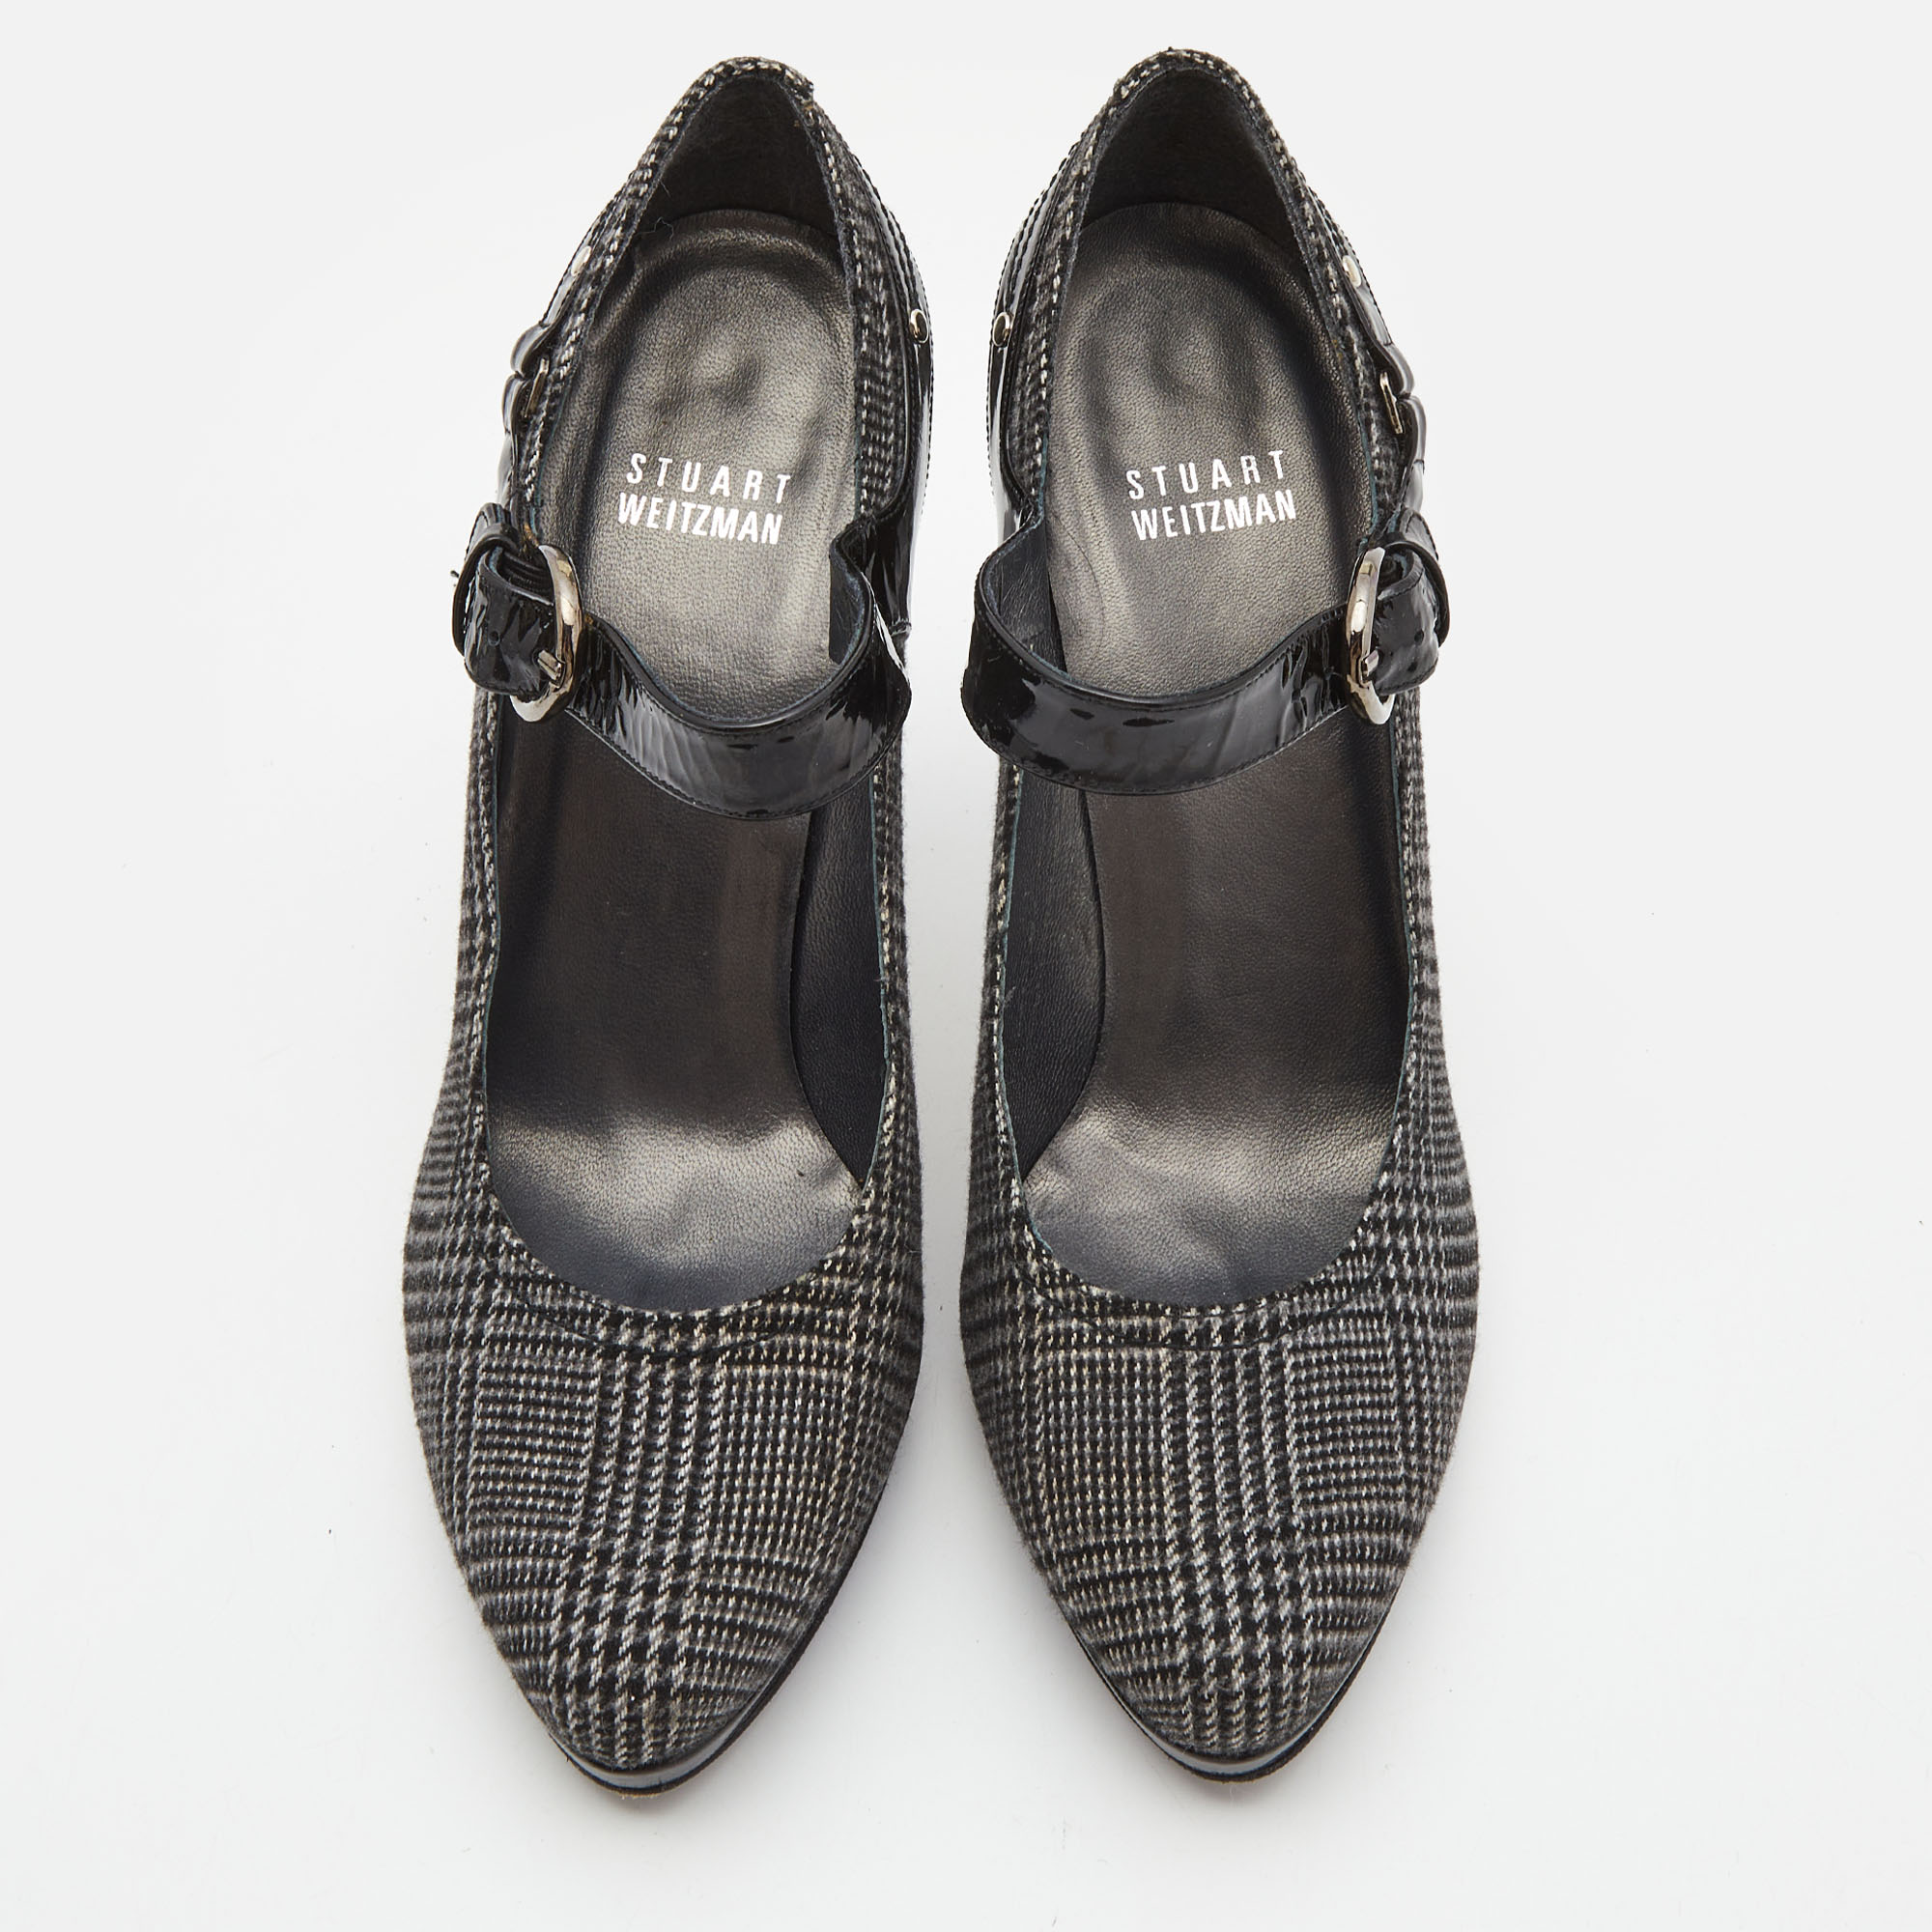 Stuart Weitzman Black/Grey Patent Leather And Plaid Wool Marianne Pumps Size 38